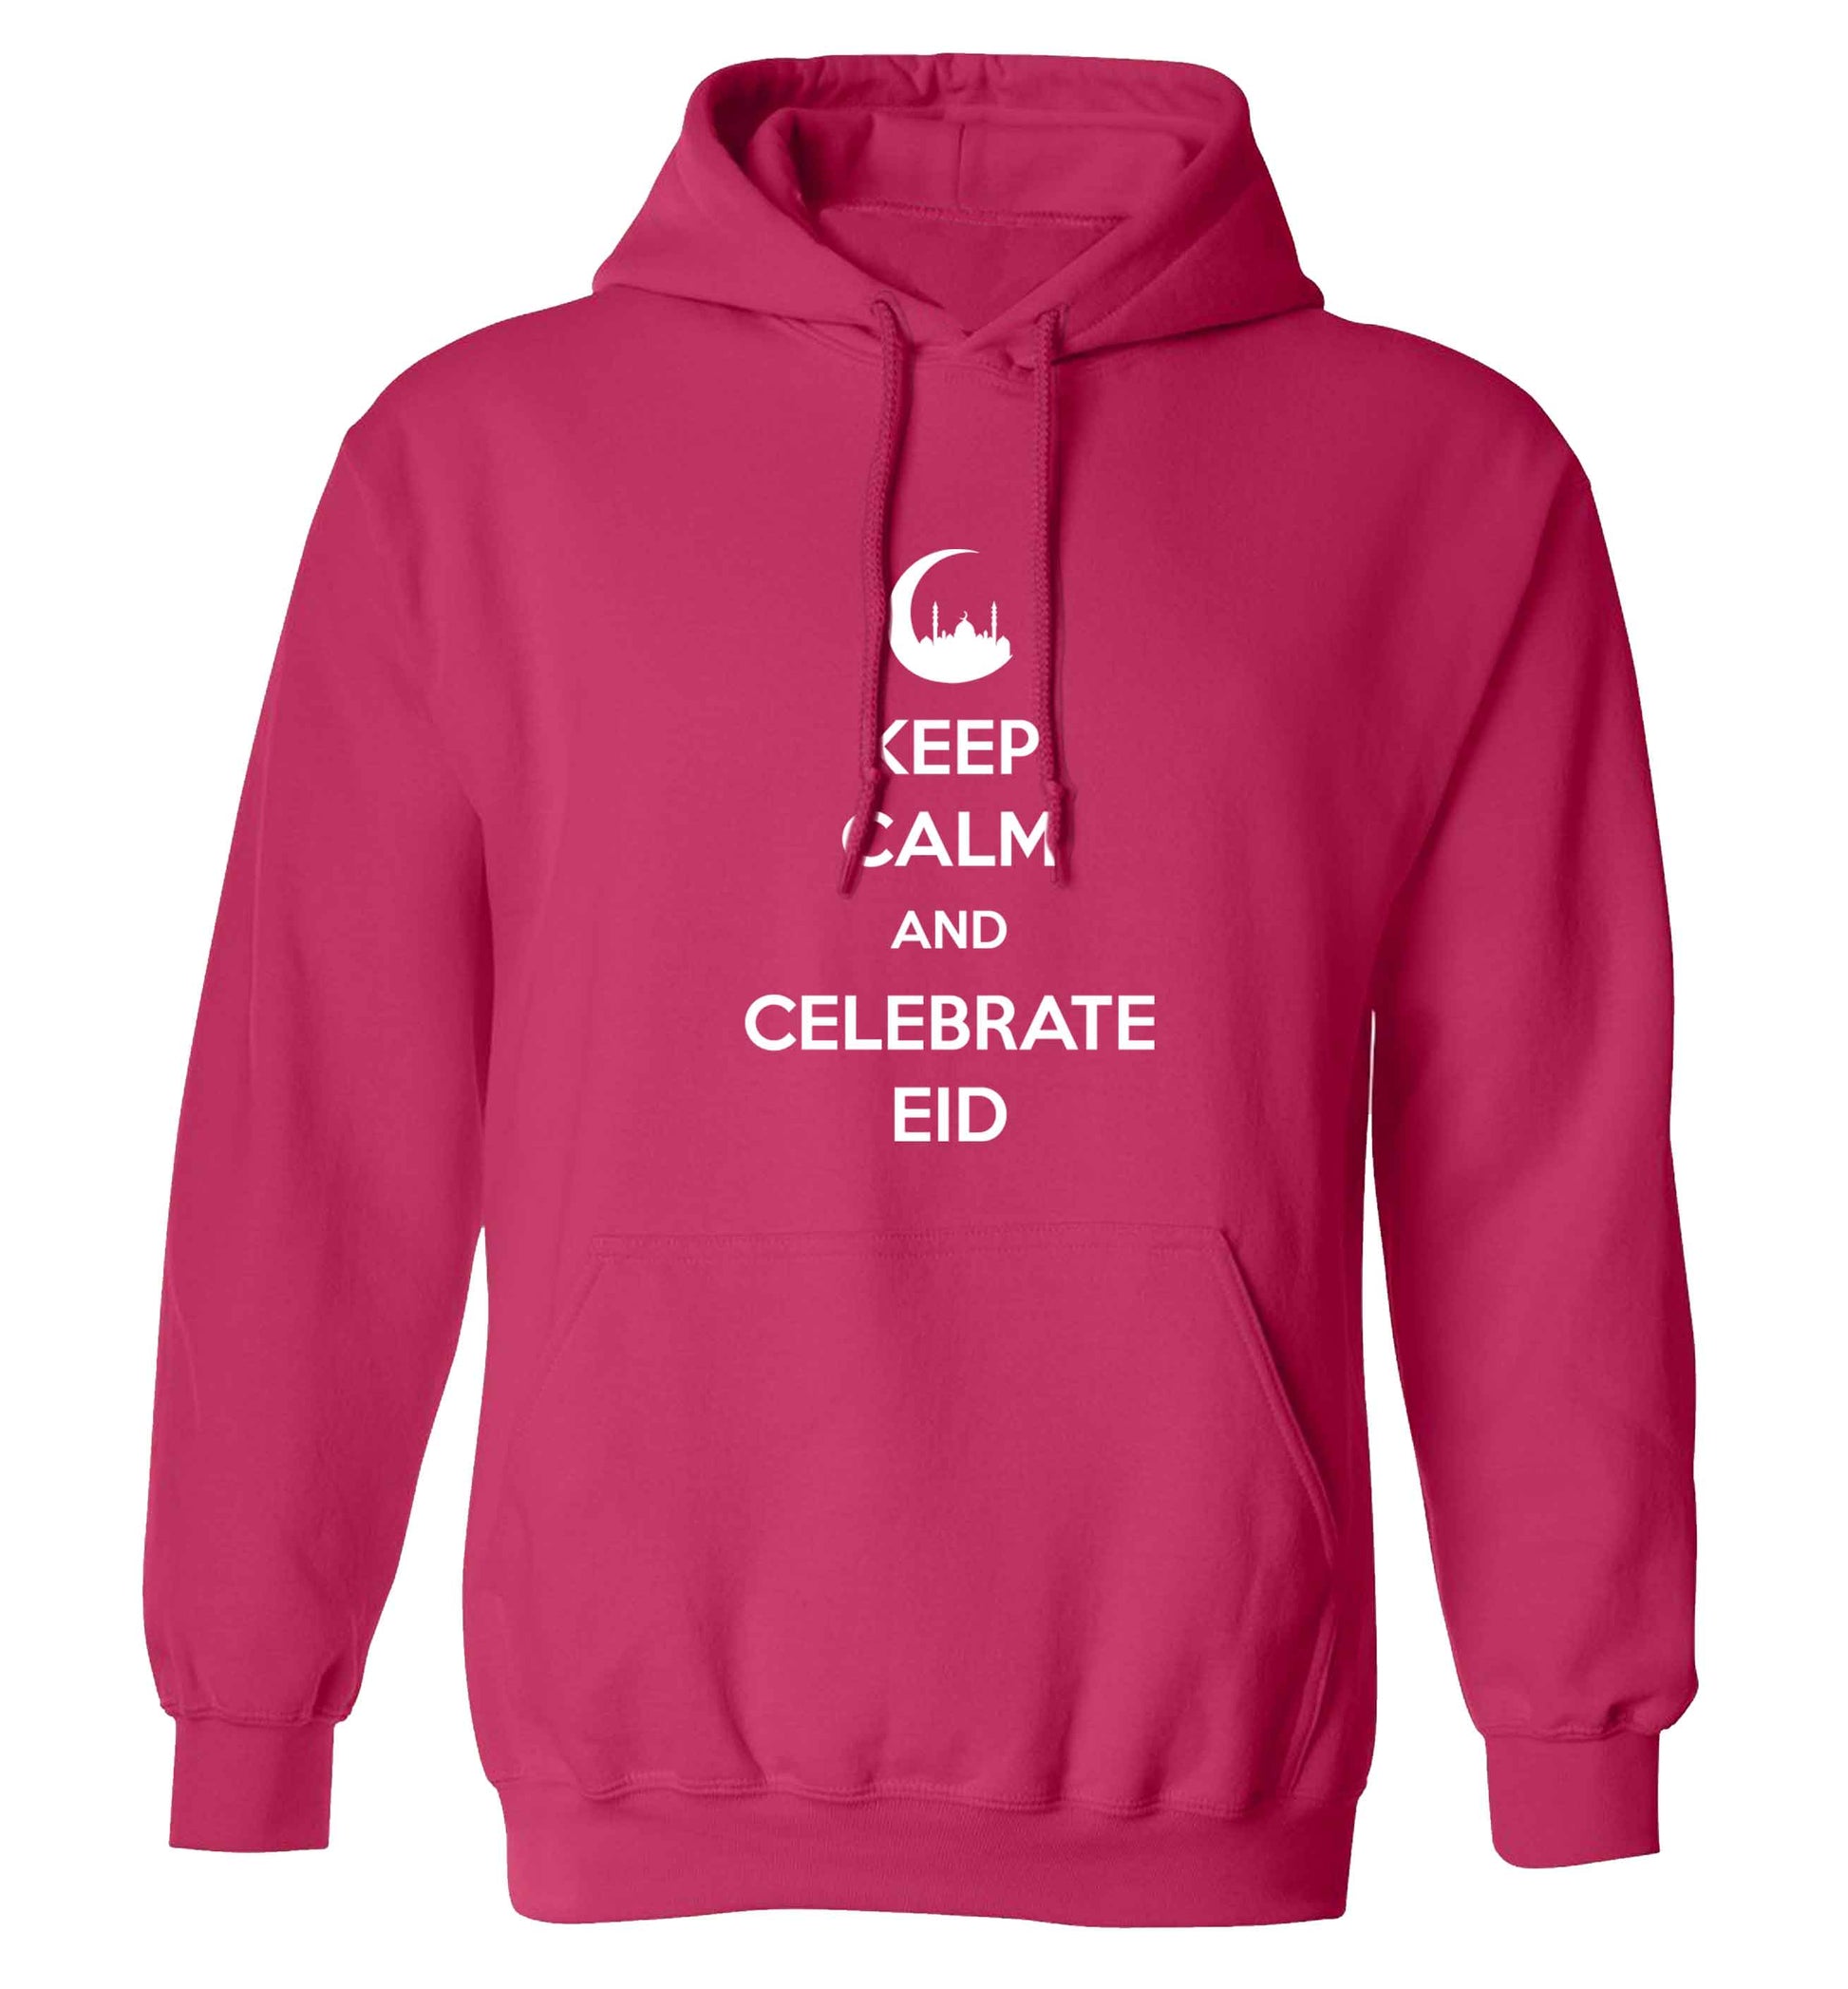 Keep calm and celebrate Eid adults unisex pink hoodie 2XL